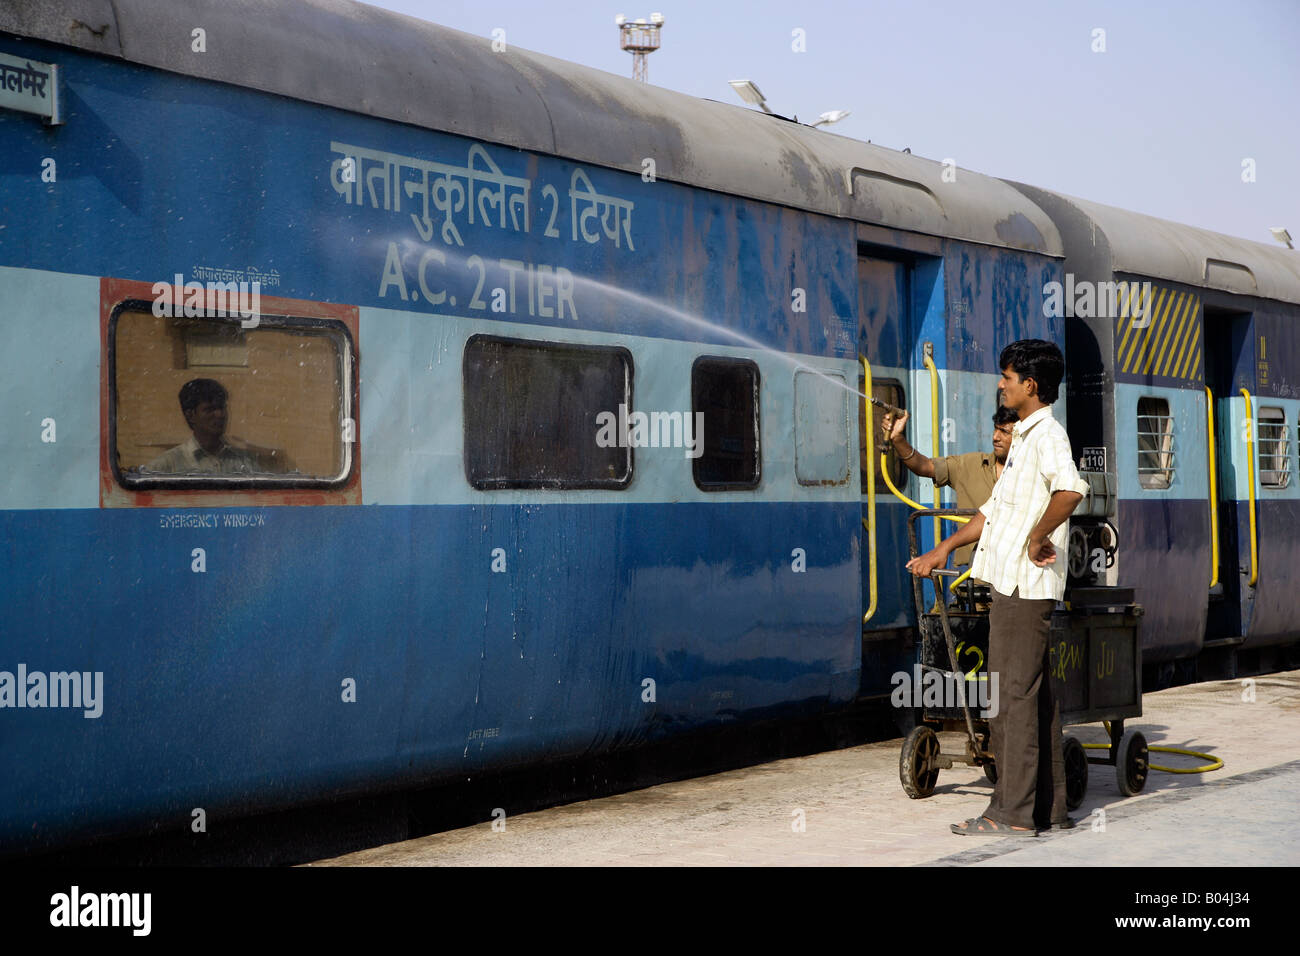 Railwaymen cleaning train carriages, Jaisalmer, Rajasthan, India Stock Photo